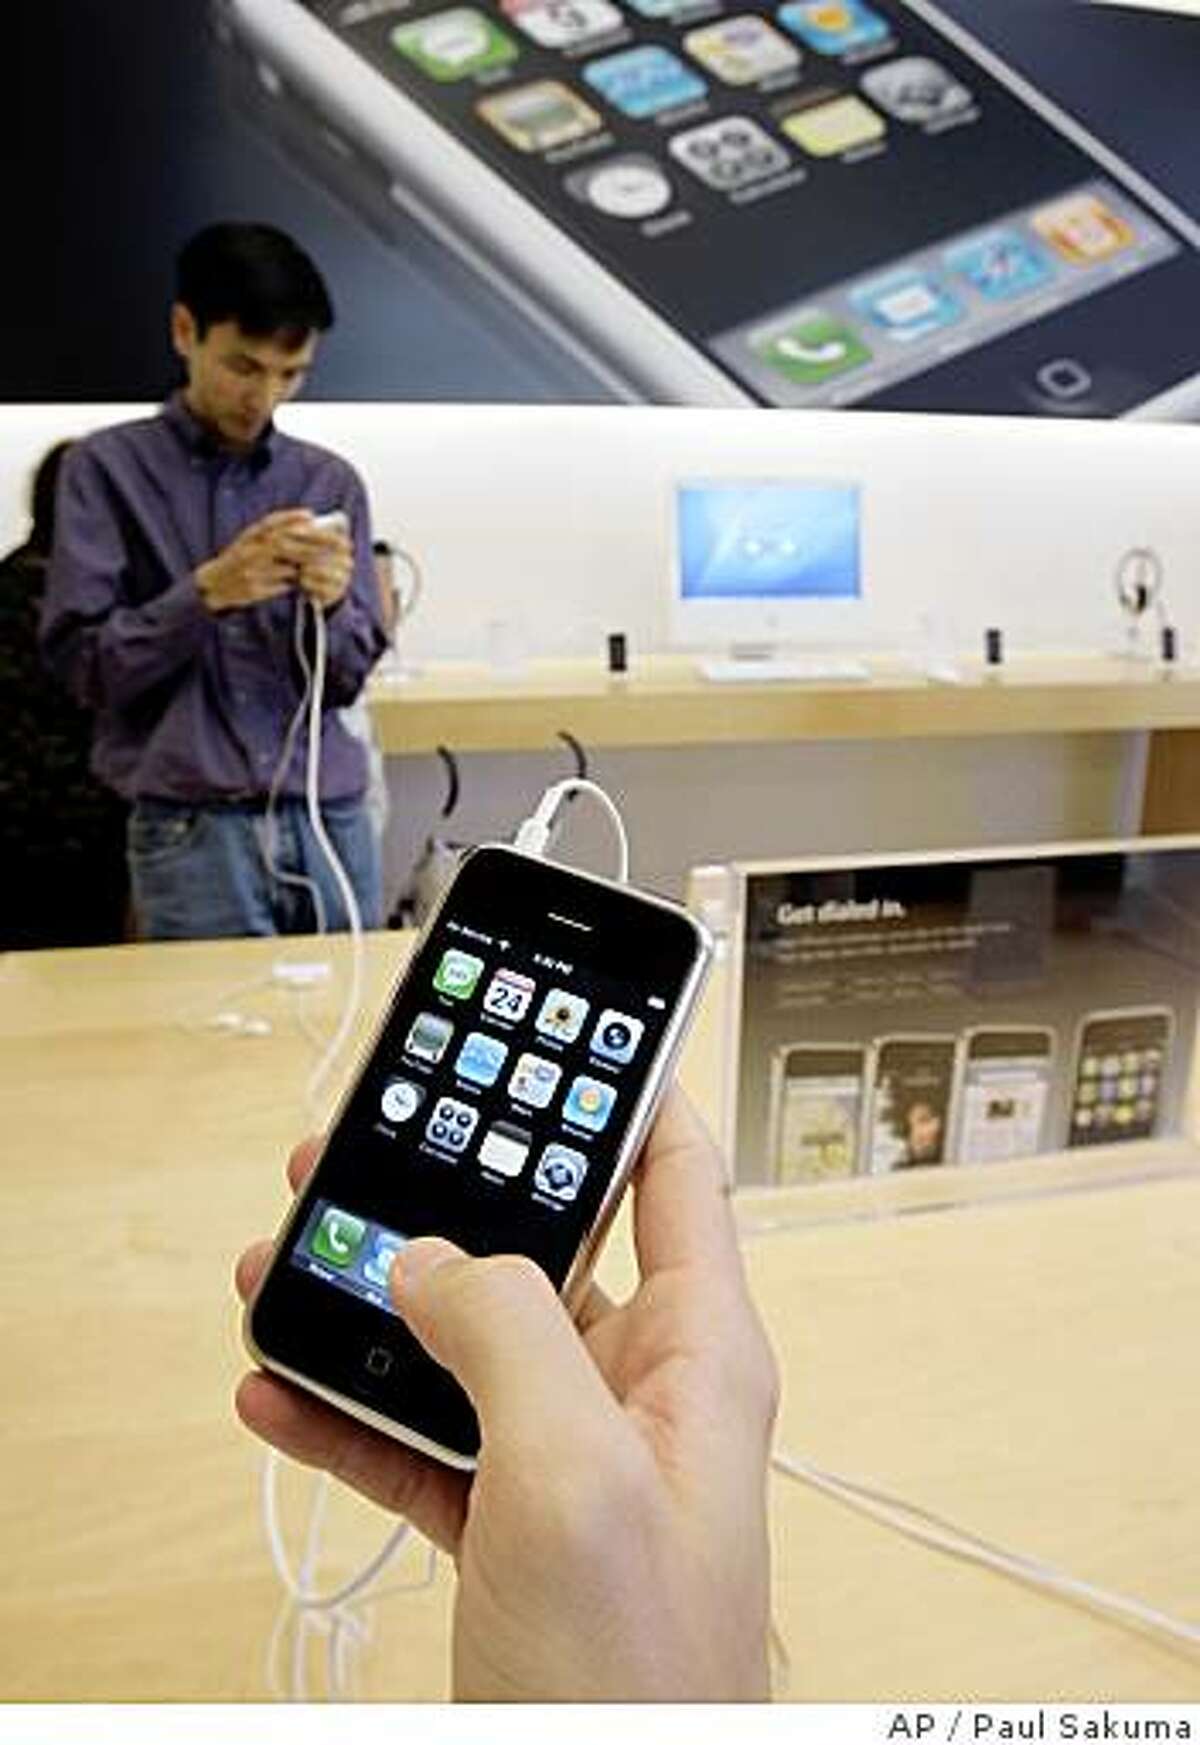 **FILE** In this July 24, 2007 file photo, customers examine Apple iPhones at an Apple store in Palo Alto, Calif.. Apple Inc. says its online stores in the U.S. and U.K. are sold out of the iPhone, a sign supplies are being winnowed ahead of the launch of the device's next generation that will feature faster Internet surfing speeds. (AP Photo/Paul Sakuma)